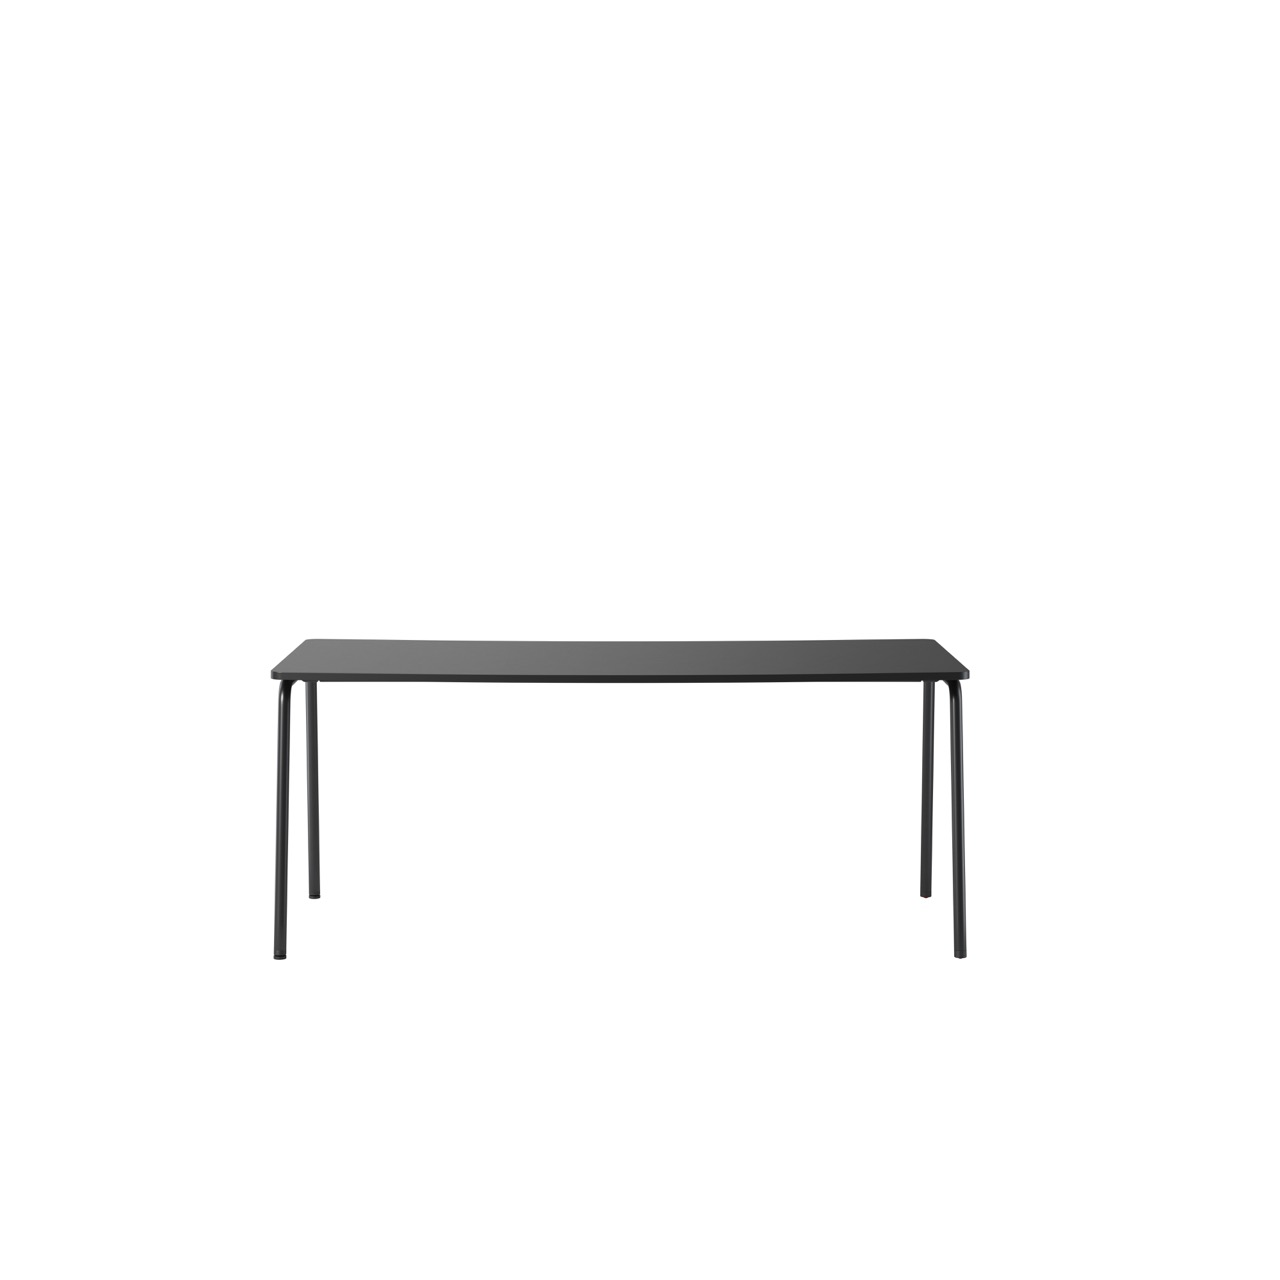 OCEE&FOUR - Tables - FourReal 74 - 180 x 80 - Angled - Packshot image 1(1) Large